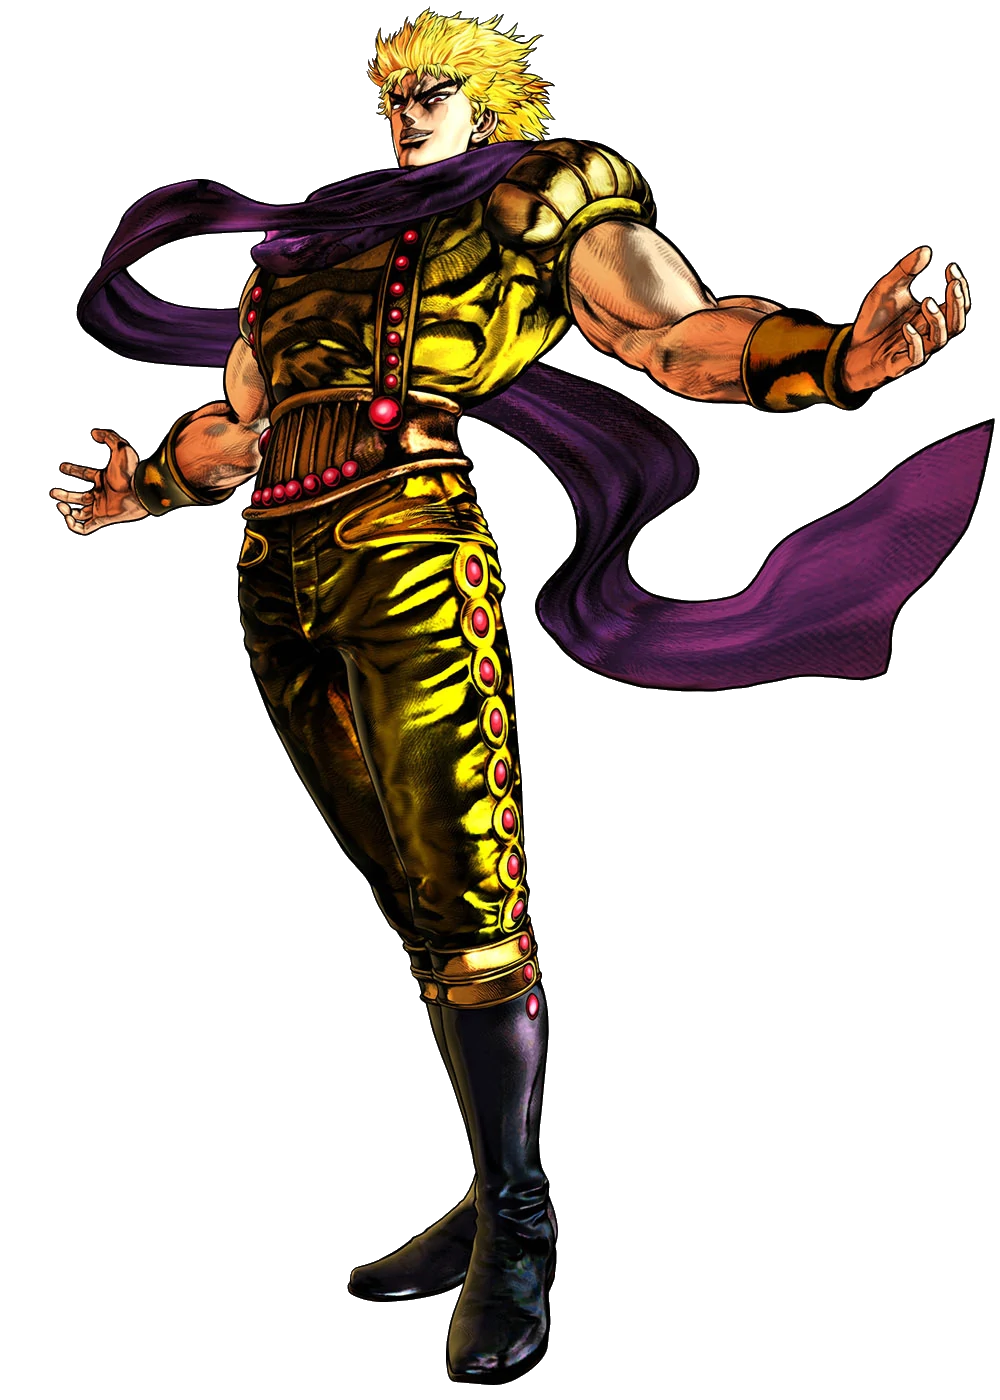 Dio Brando Png, Transparent Png - 642x1120(#6756125) - PngFind